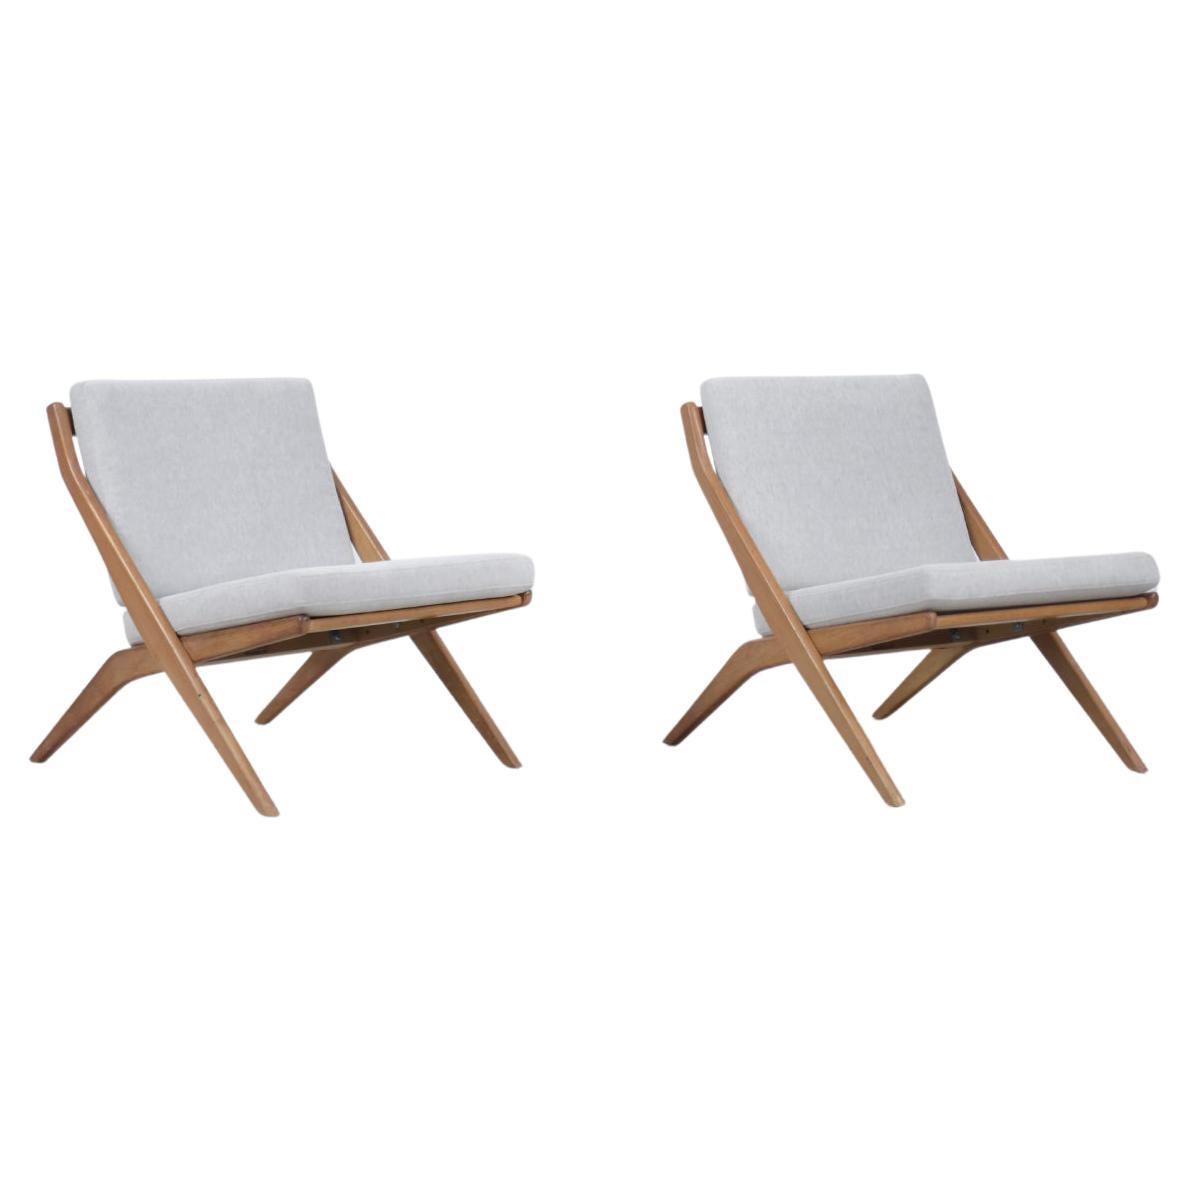 Pair of Mid-Century Modern Swedish Scissor Chairs by Folke Ohlsson for Bodafors For Sale